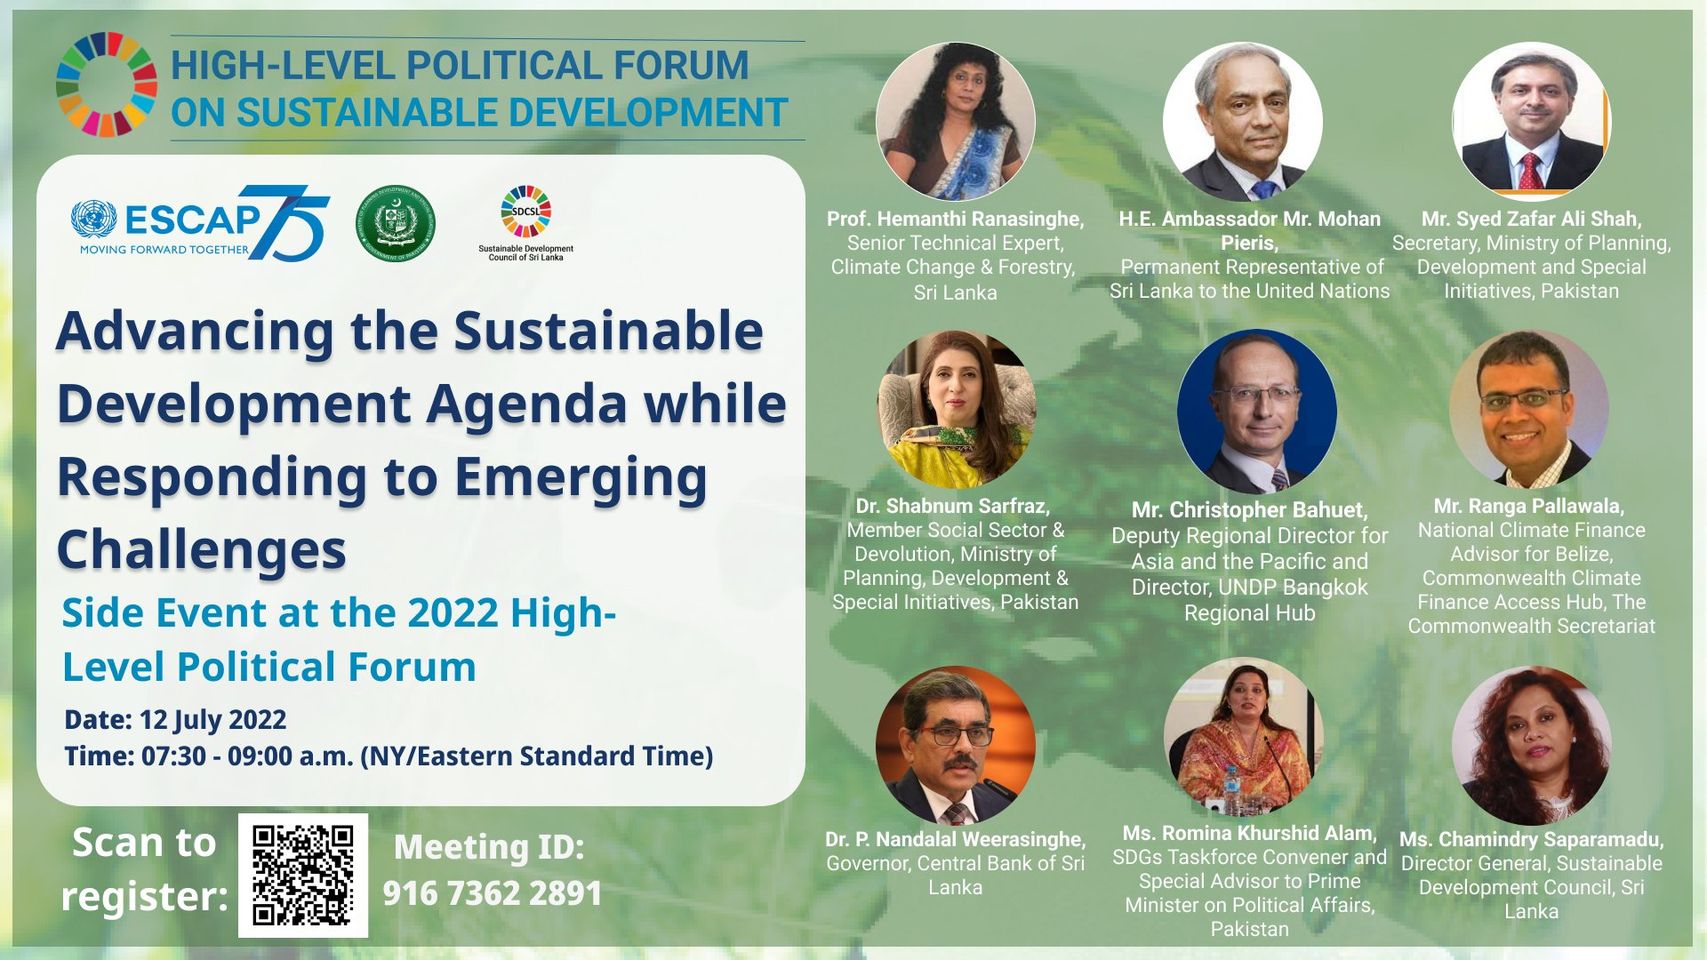 Advancing the Sustainable Development Agenda while Responding to Emerging Challenges